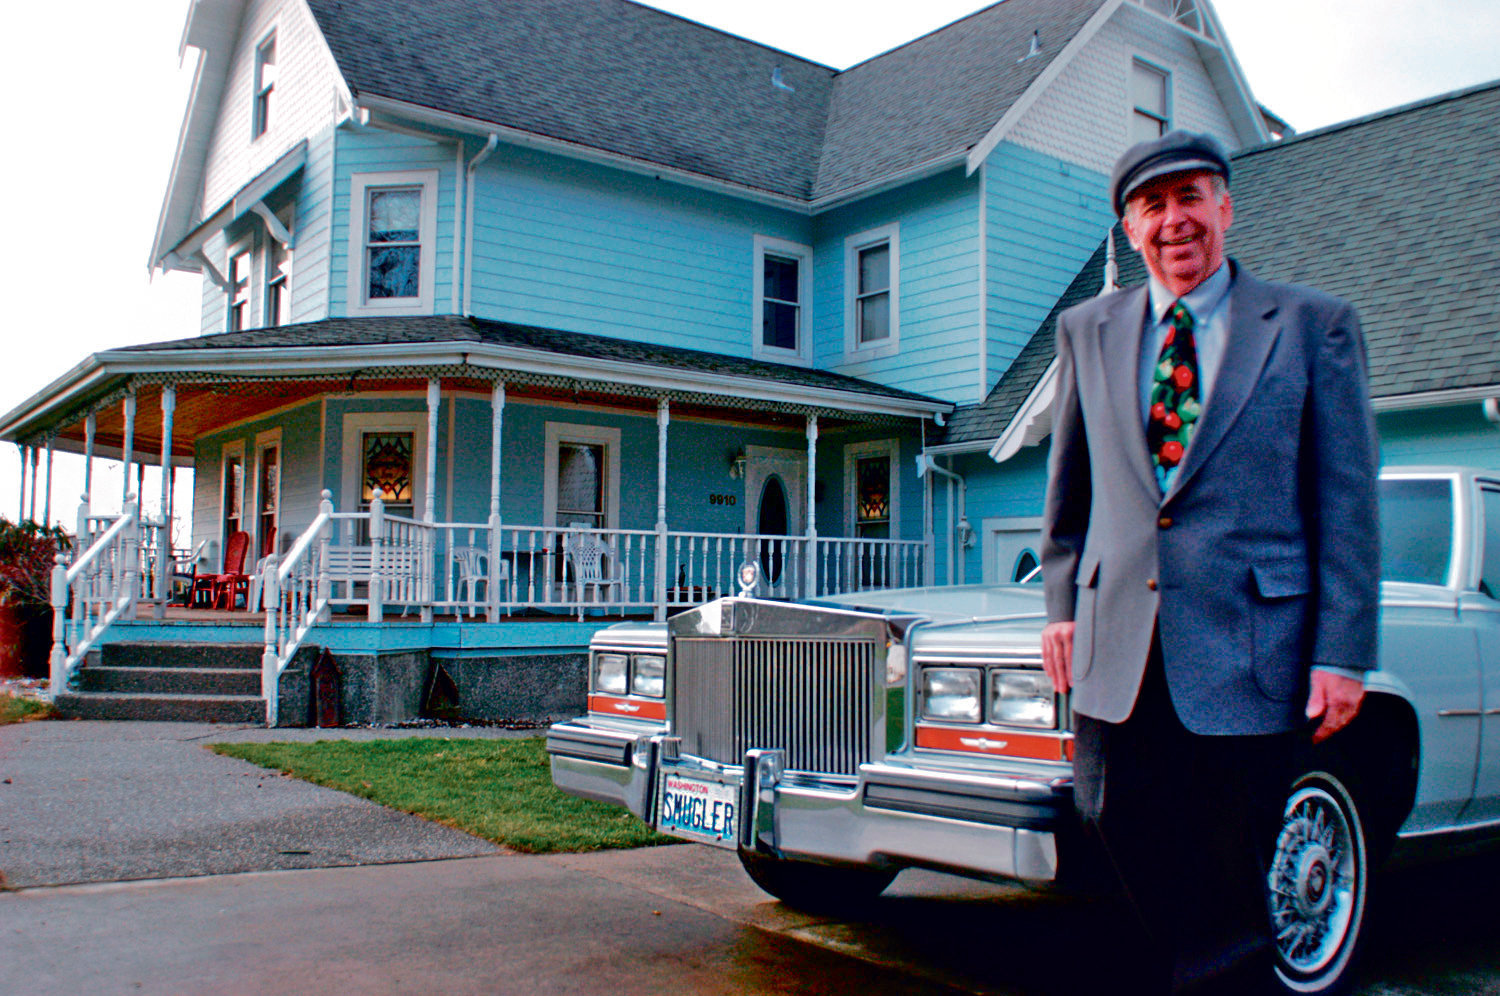 Smuggler’s Inn owner Bob Boule in front of his Blaine bed-and-breakfast. A civil case between Boule and a U.S. Customs and Border Protection agent has made it to the U.S. Supreme Court.